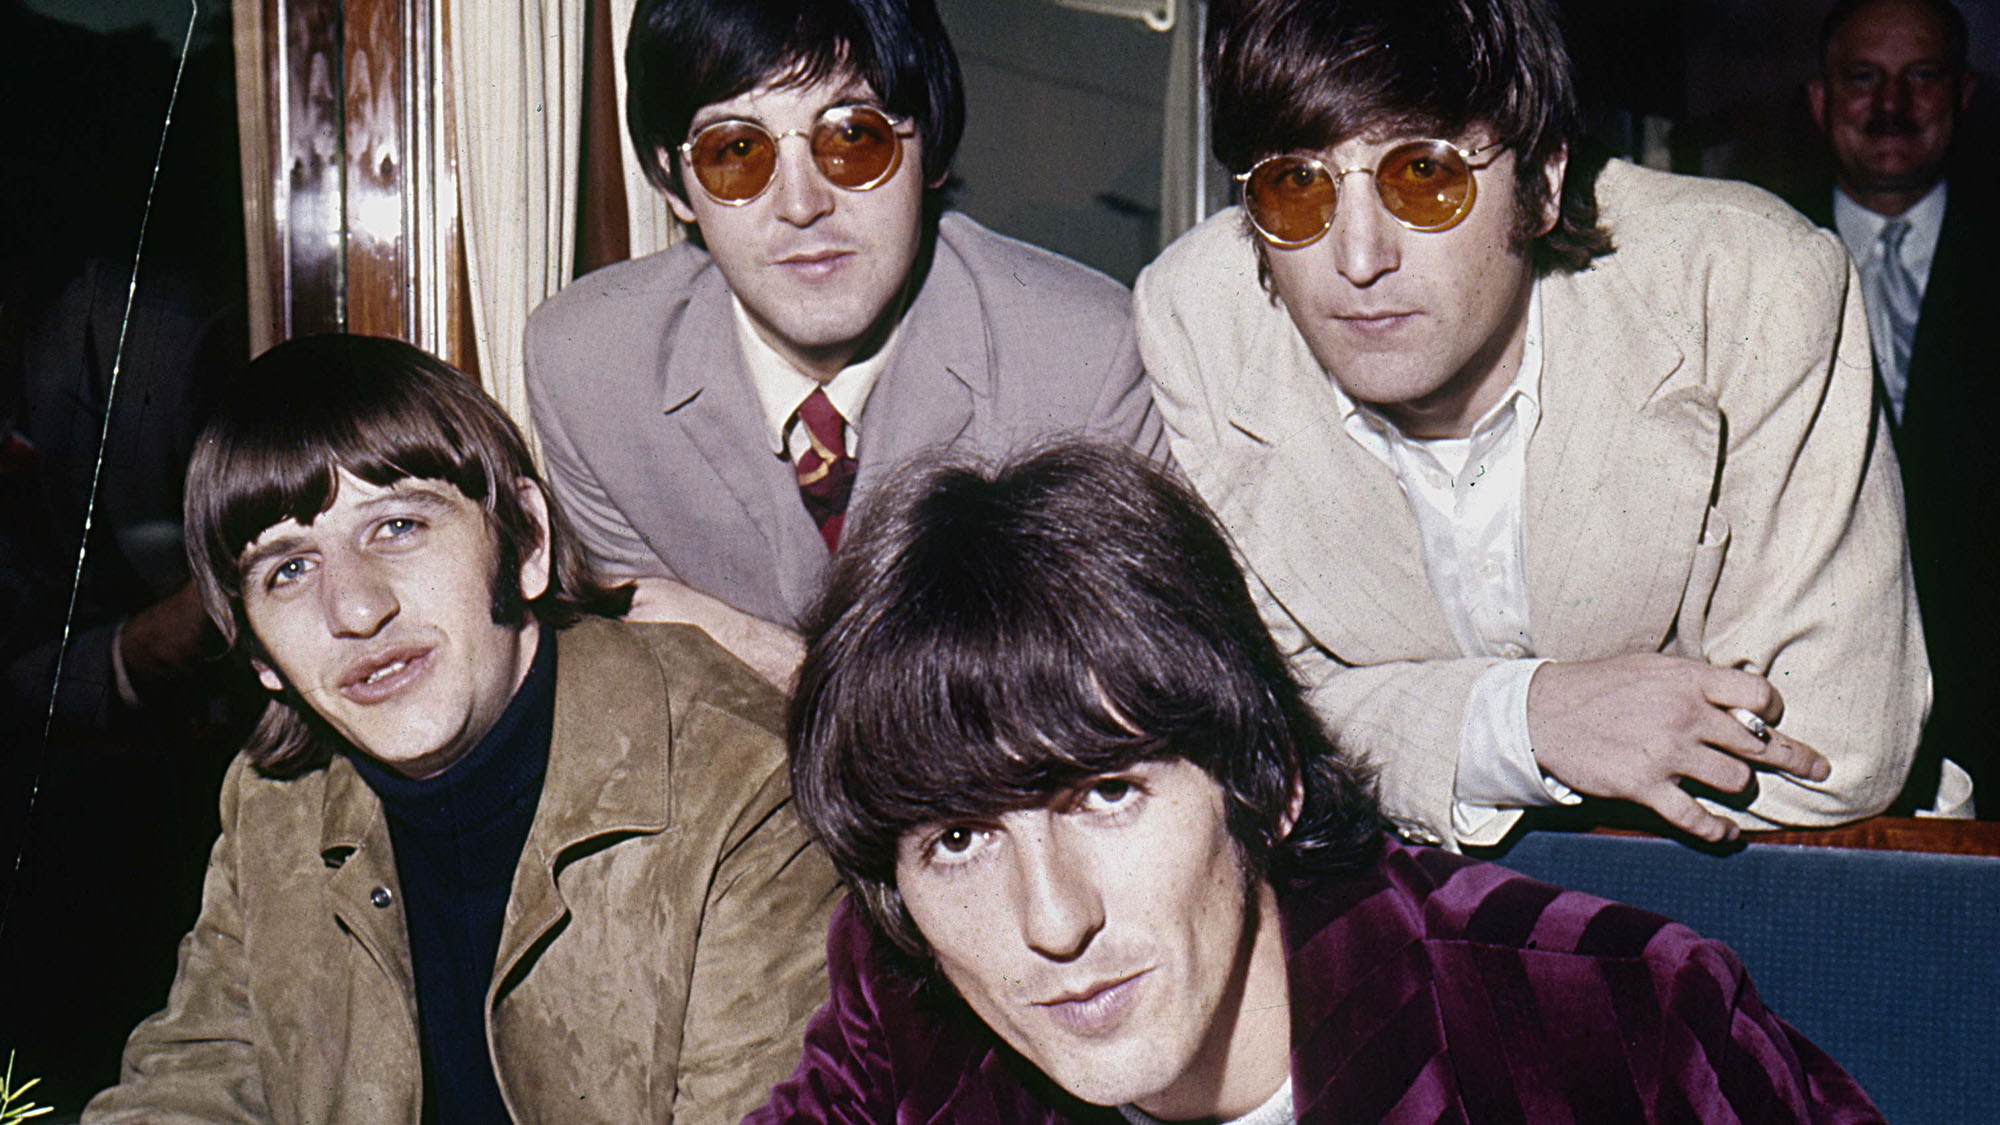 Listen to ‘Now and Then’ by The Beatles, a ‘new’ song recorded using AI